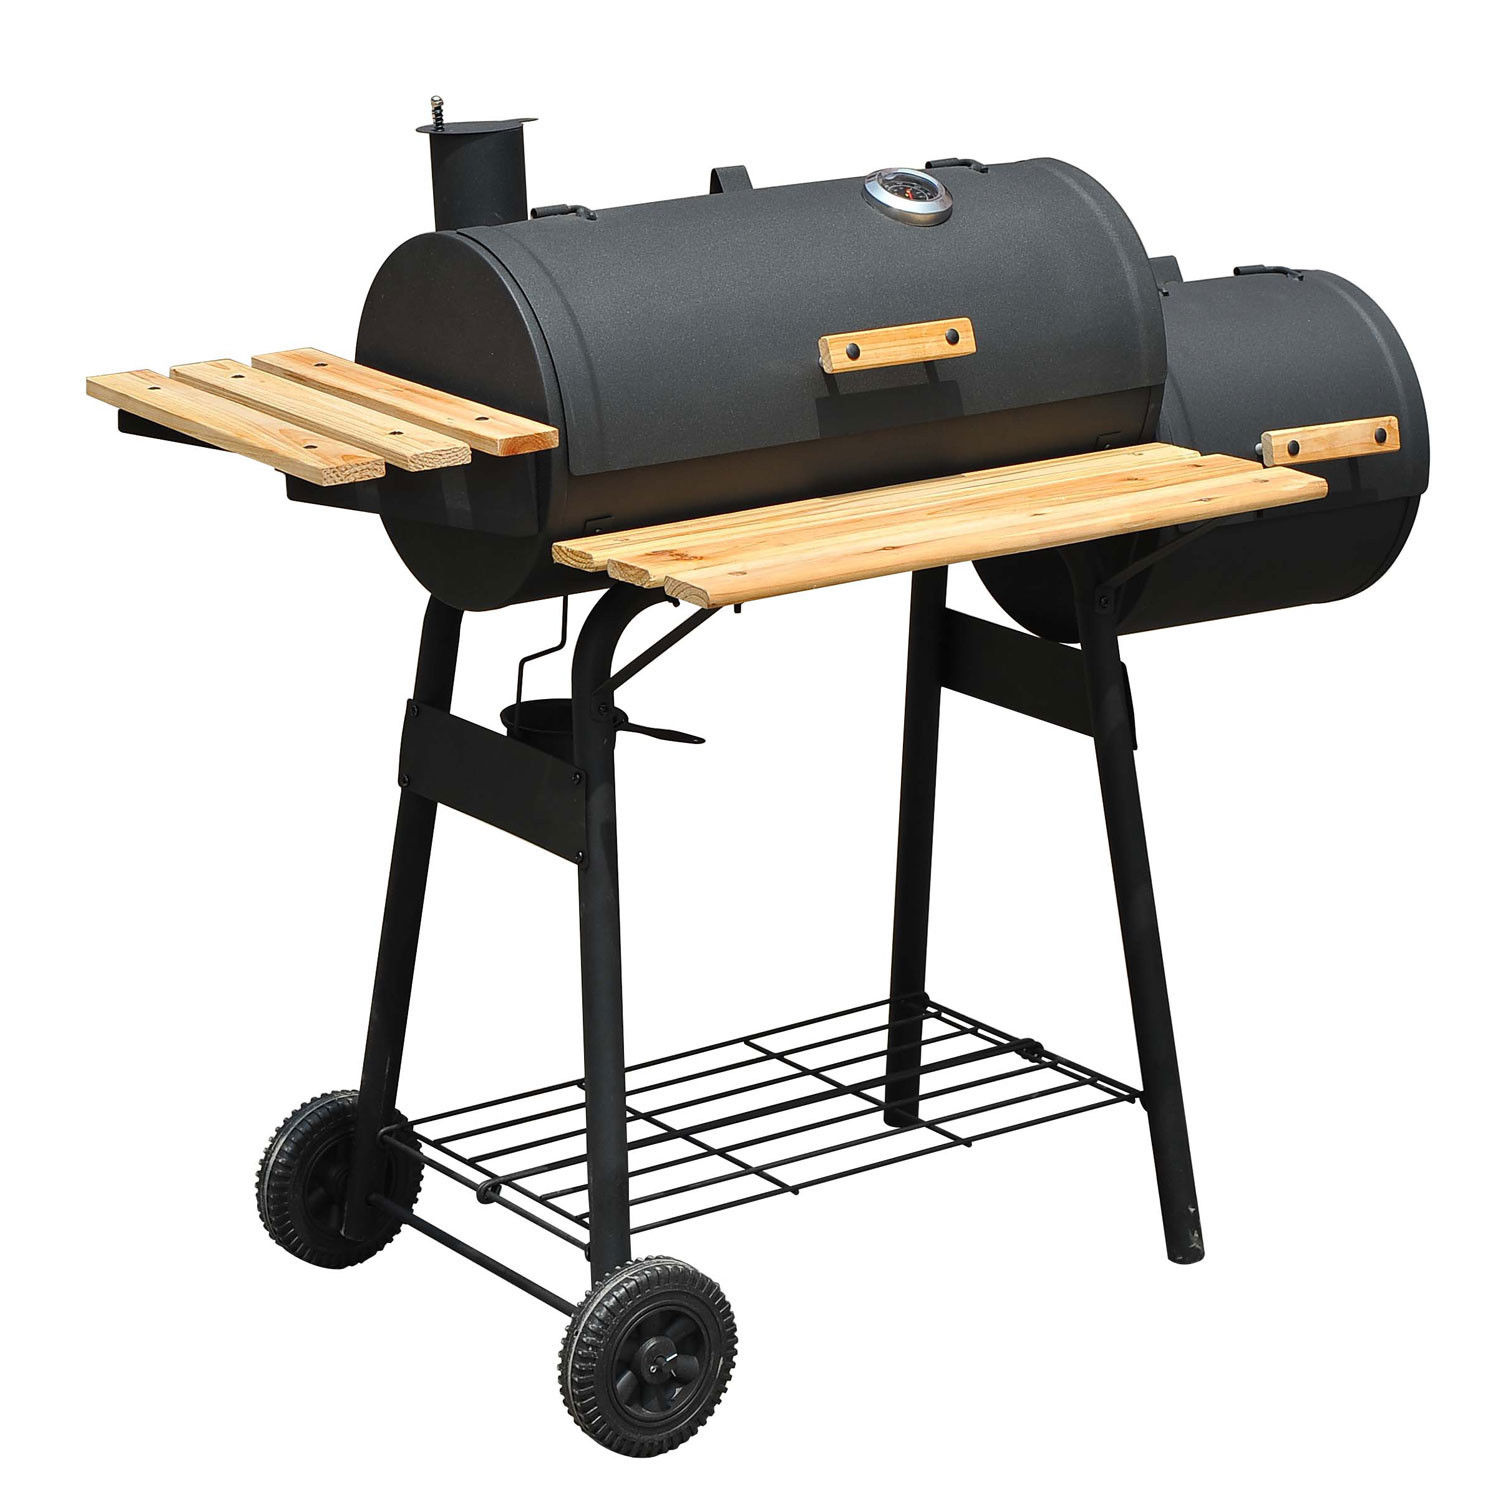 https://wholesaleeventtents.com/wp-content/uploads/2016/09/48-Inch-Charcoal-Barbecue-Grill-Patio-Smoker.jpg